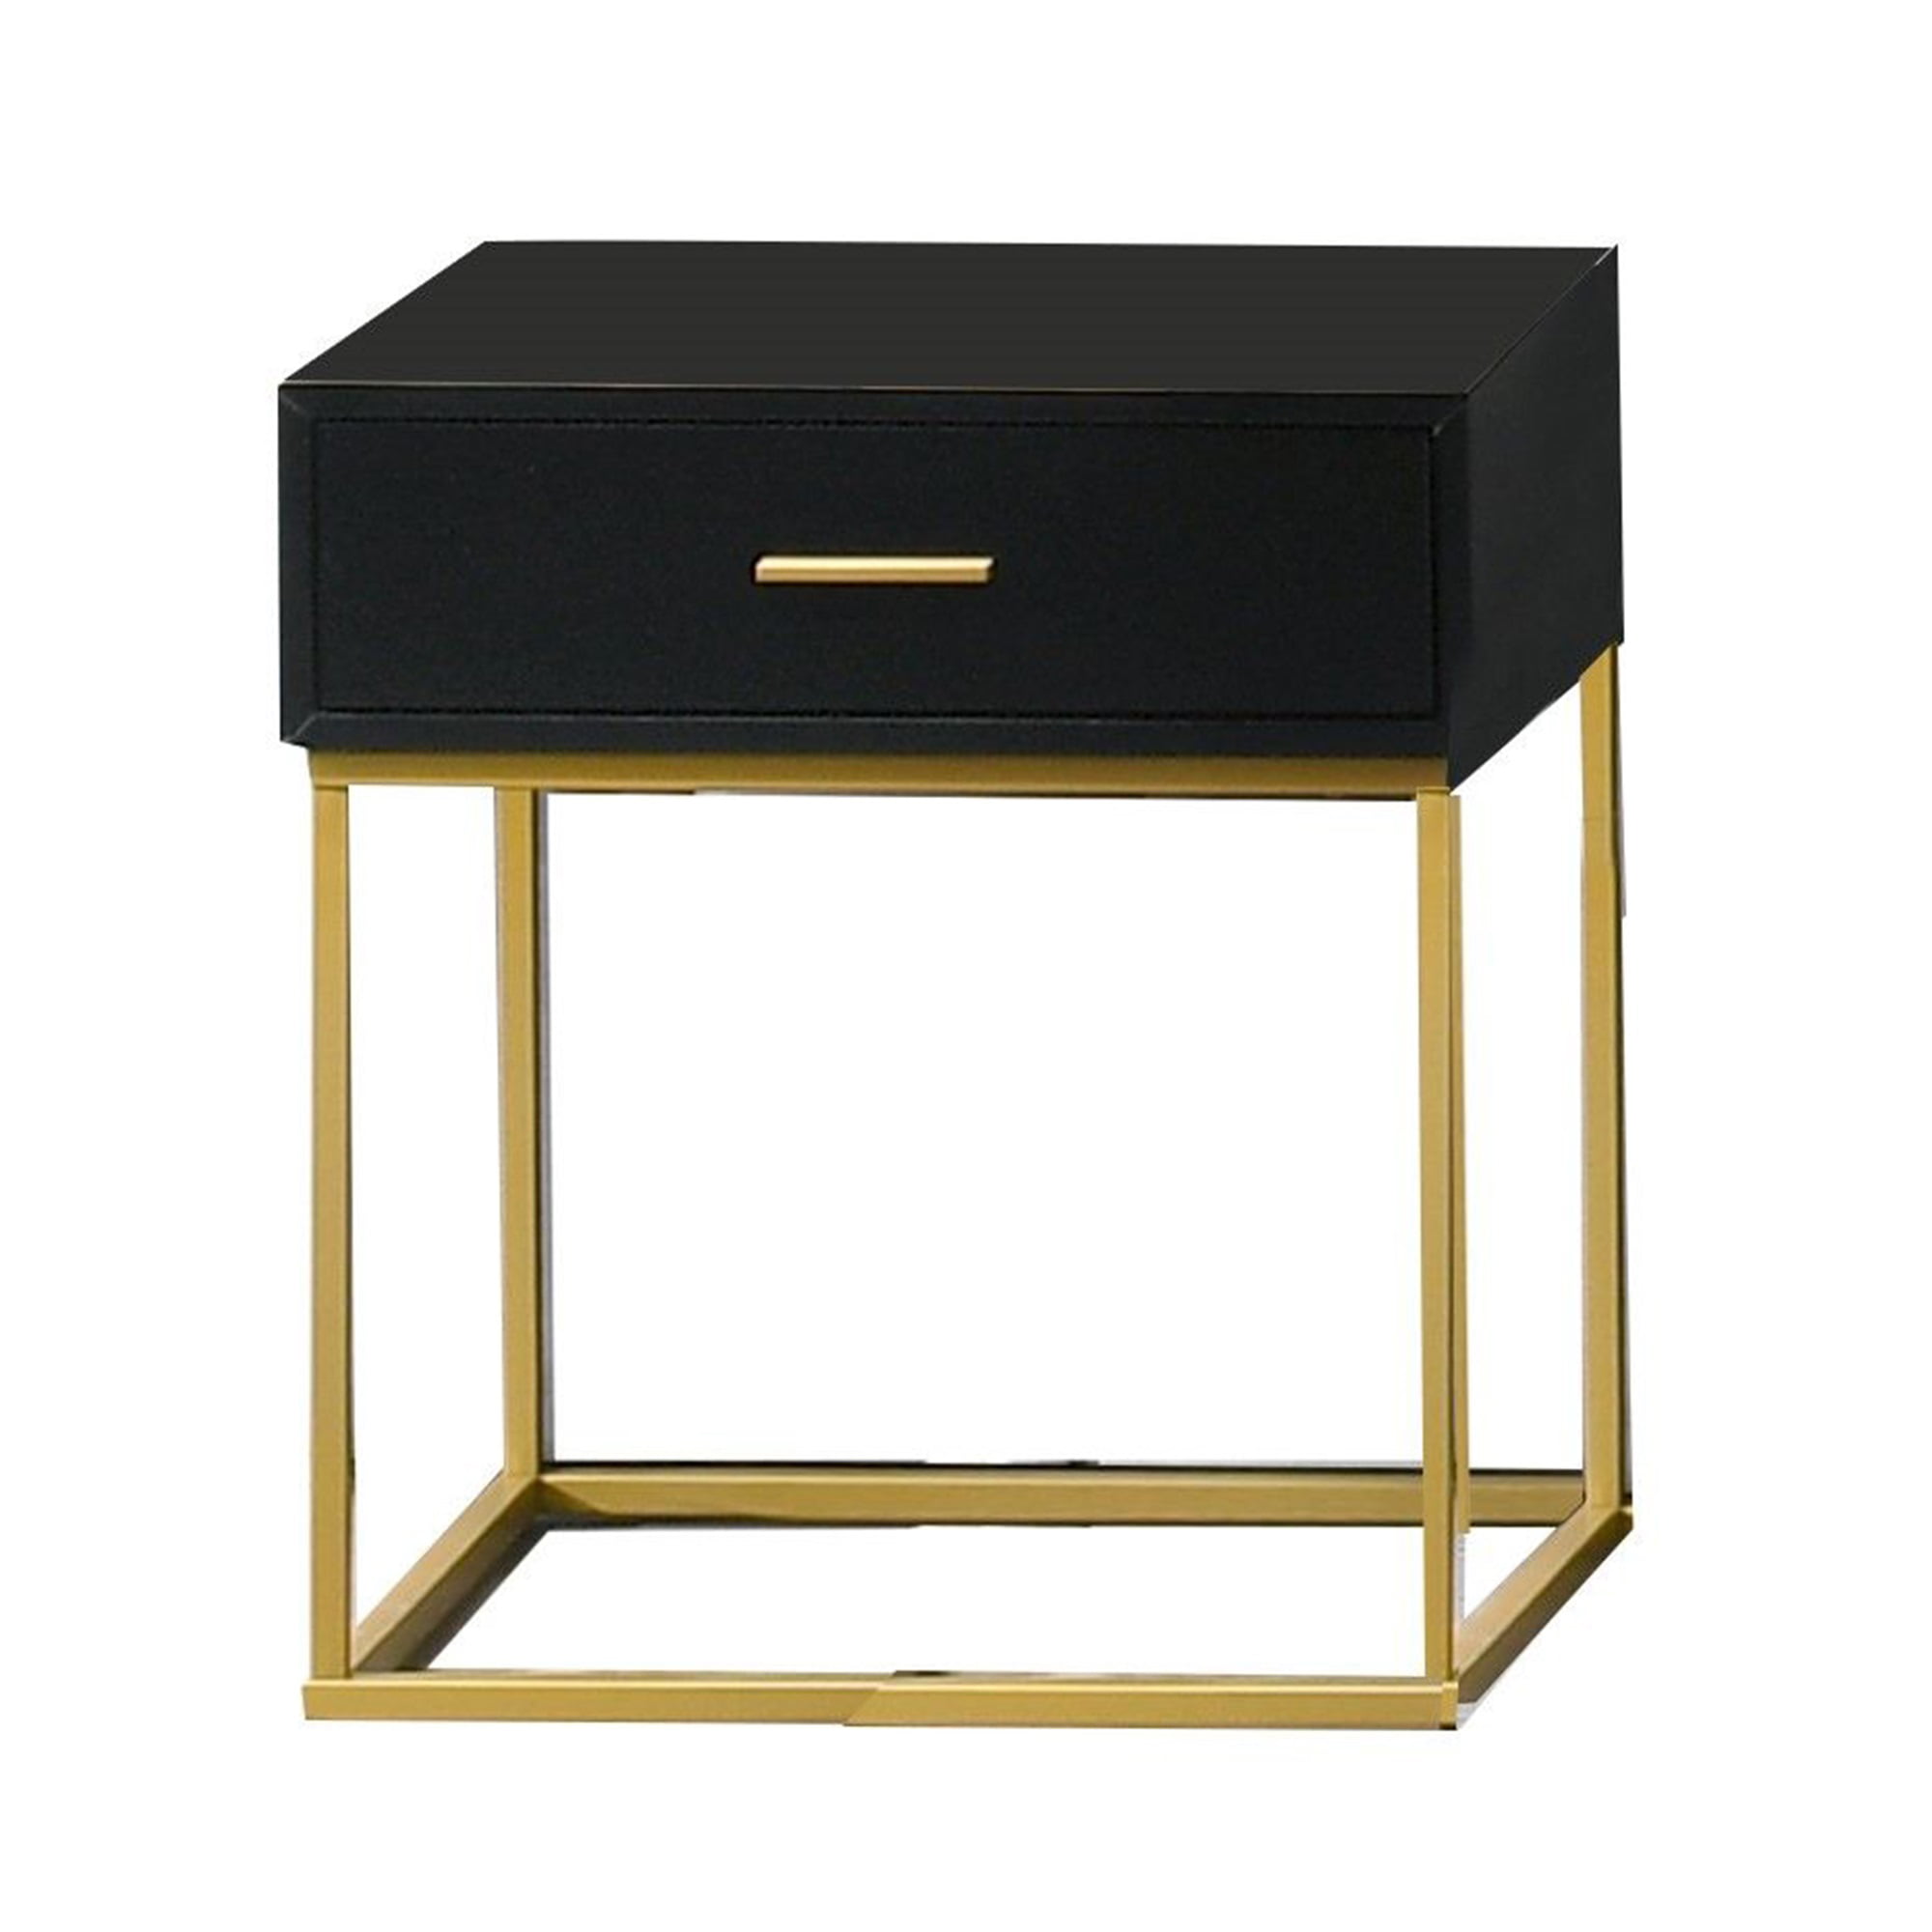 1 Drawer Wooden Nightstand with Metal Legs, Black and Gold